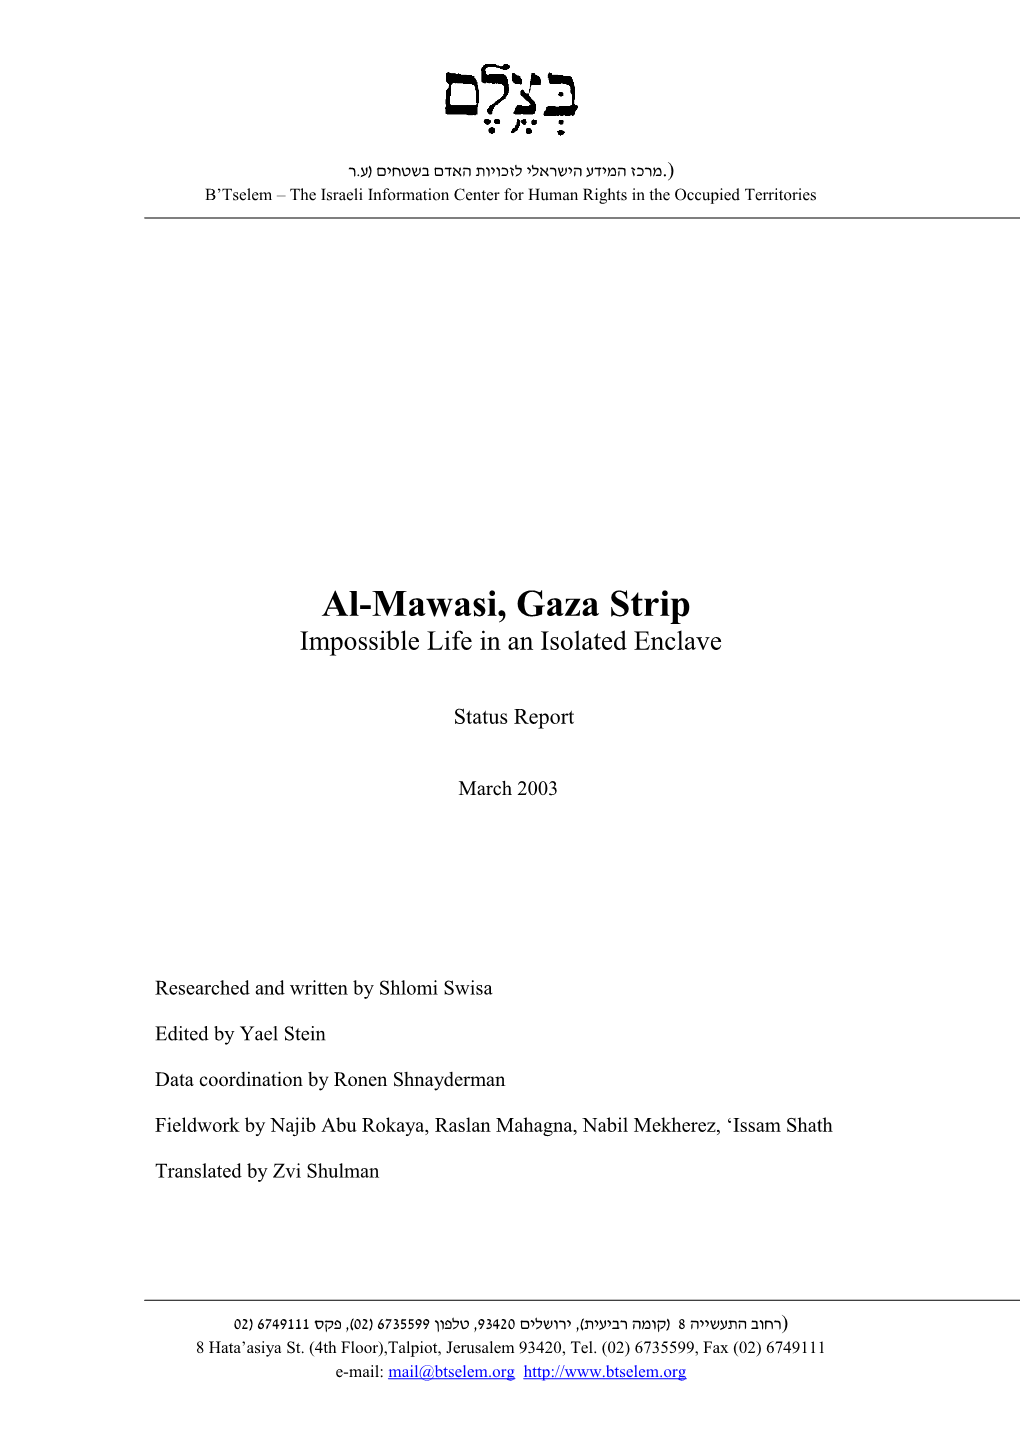 B'tselem - Al-Mawasi, Gaza Stripo: Impossible Life in an Isolated Enclave, Status Report